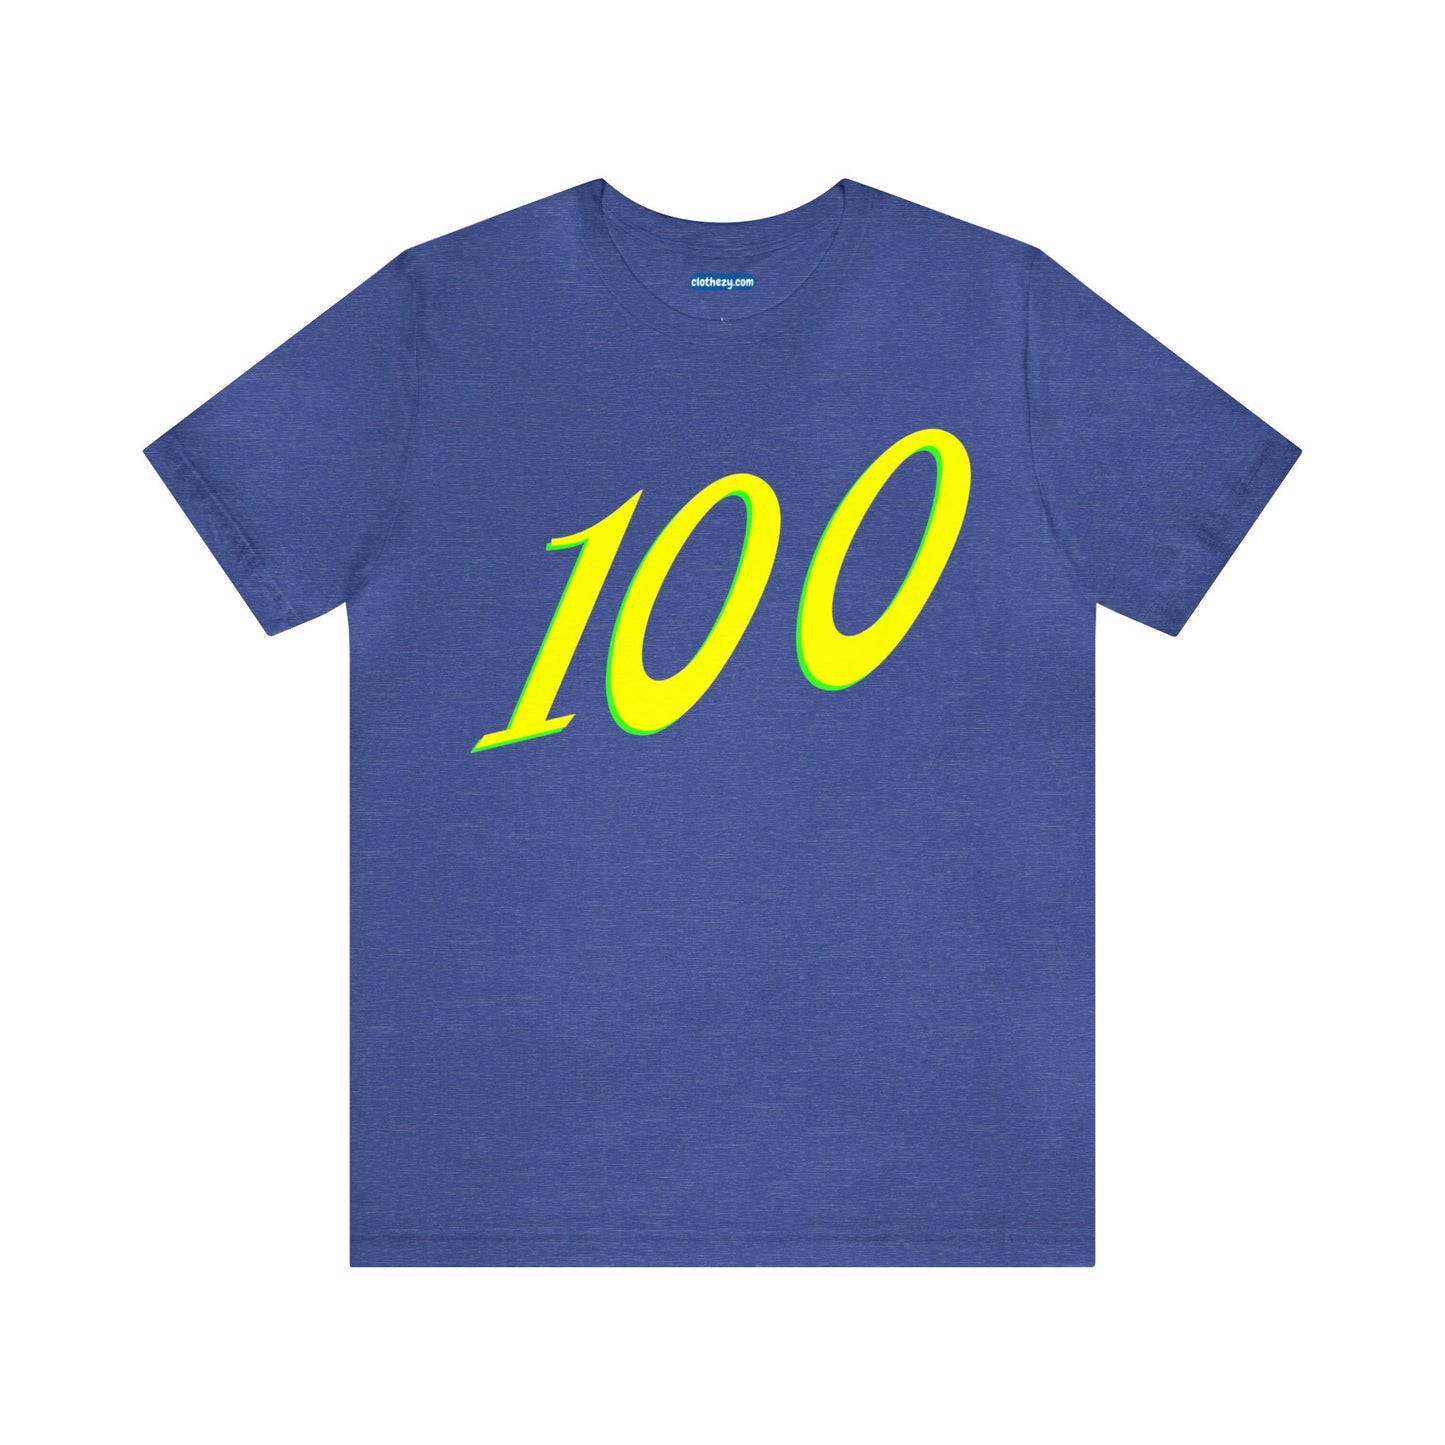 Number 100 Design - Soft Cotton Tee for birthdays and celebrations, Gift for friends and family, Multiple Options by clothezy.com in Royal Blue Heather Size Small - Buy Now